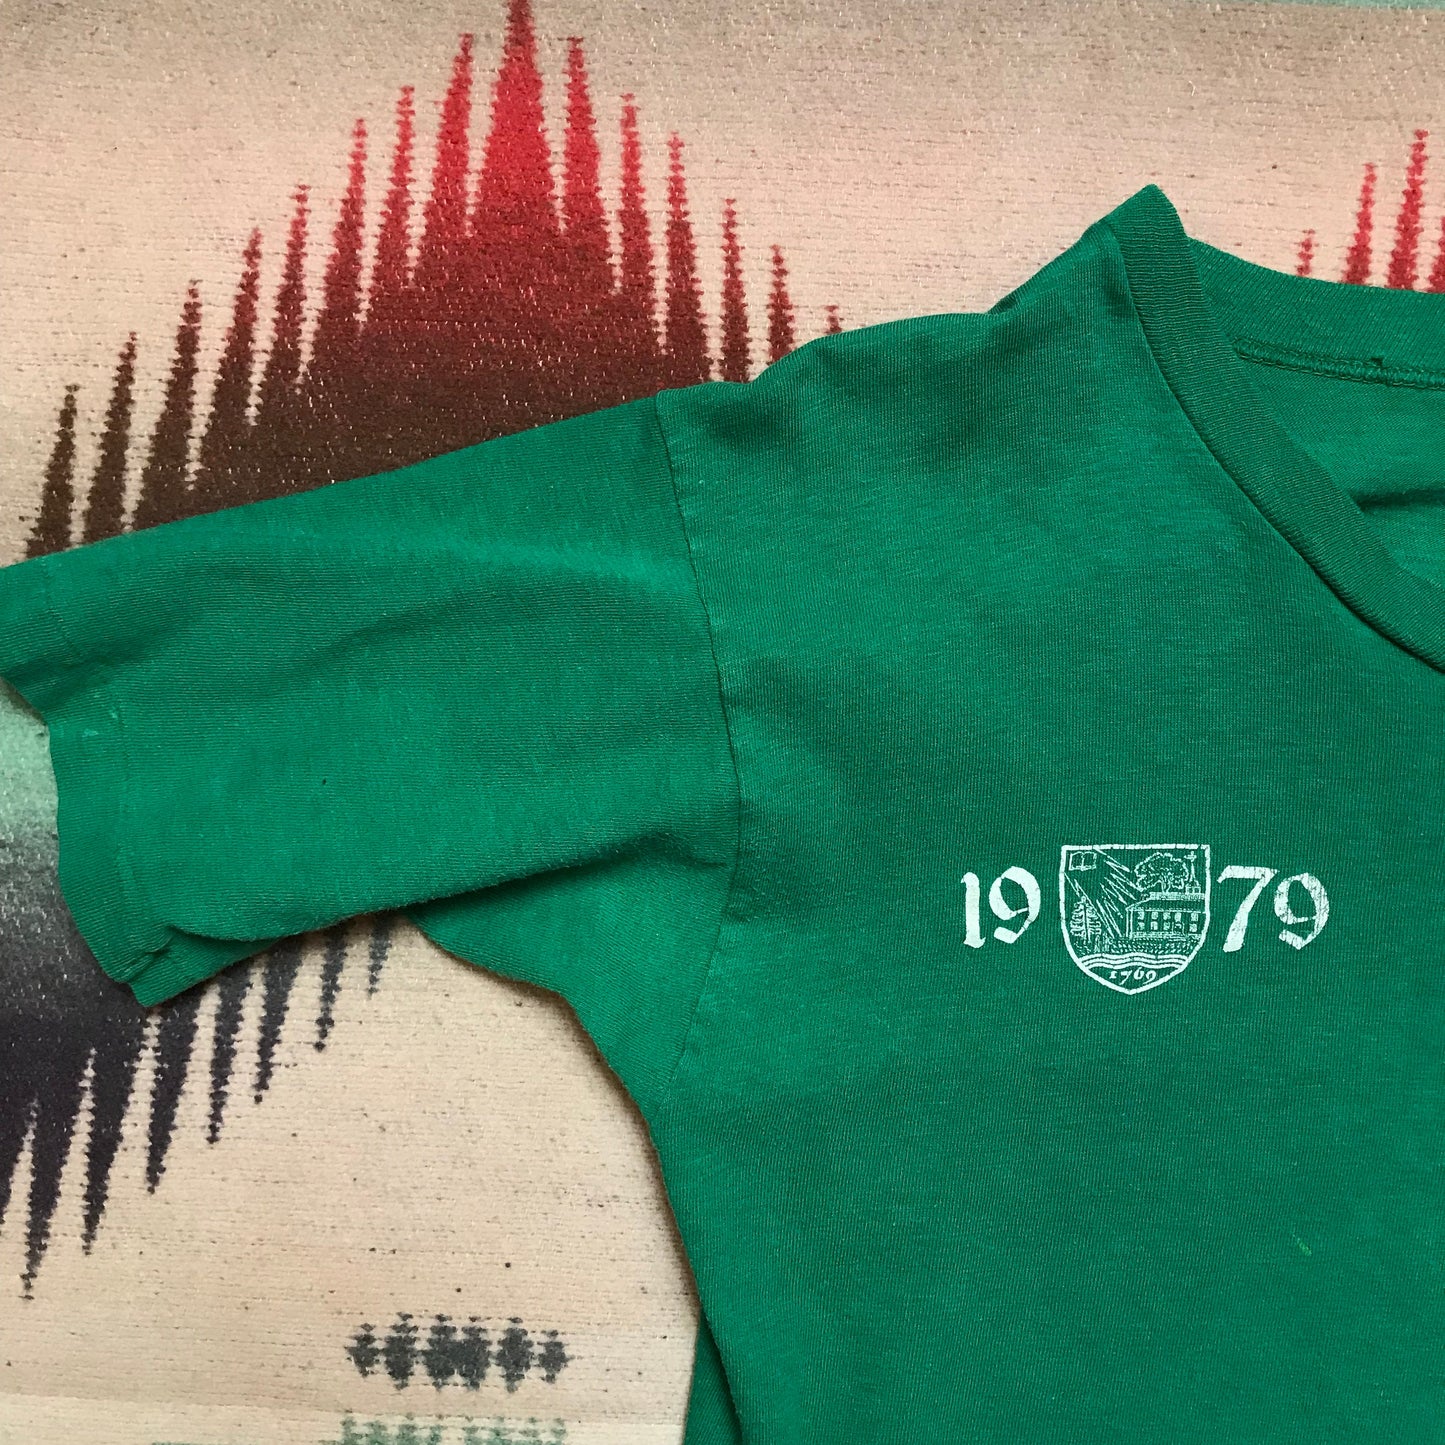 1970s Dartmouth College Class of 79 Mayo Spruce T-Shirt Made in USA Size XS/S